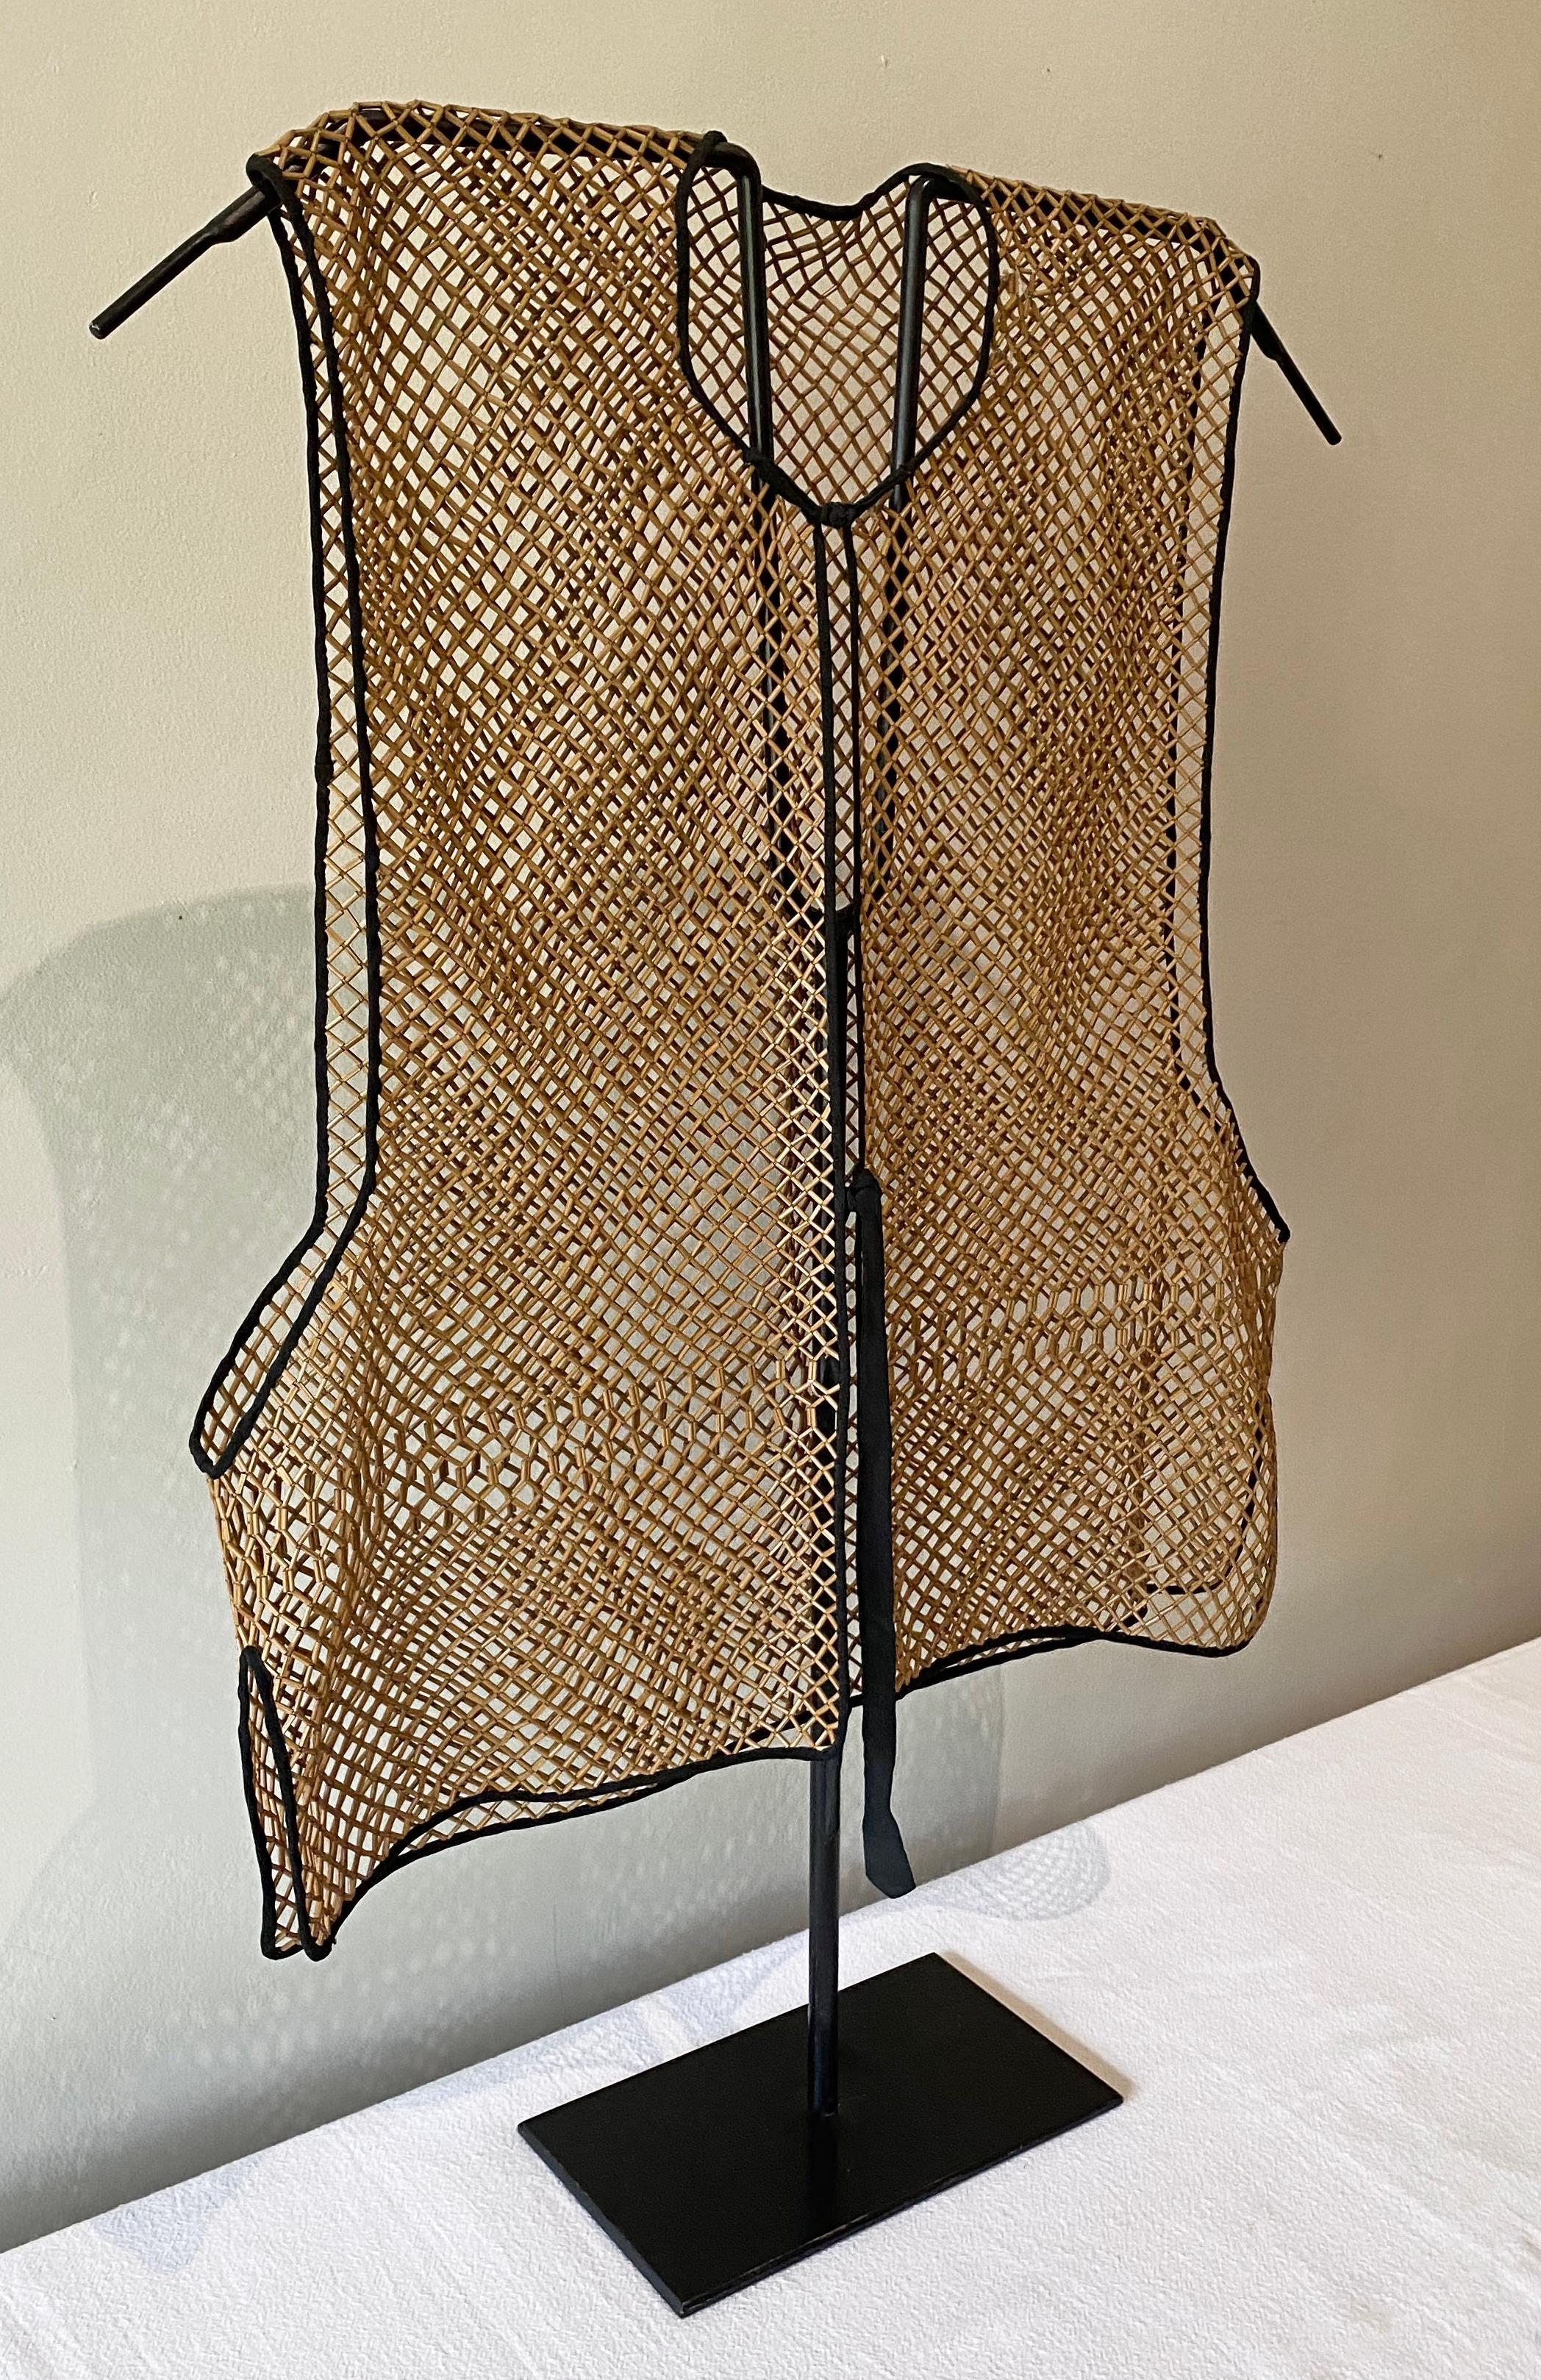 This bamboo vest from the Qing Dynasty required exceptional skill to craft, using extremely thin bamboo shoots and a thin silk lining on the edges. It was worn as an undergarment for ventilation and protecting highly elaborate and expensive silk